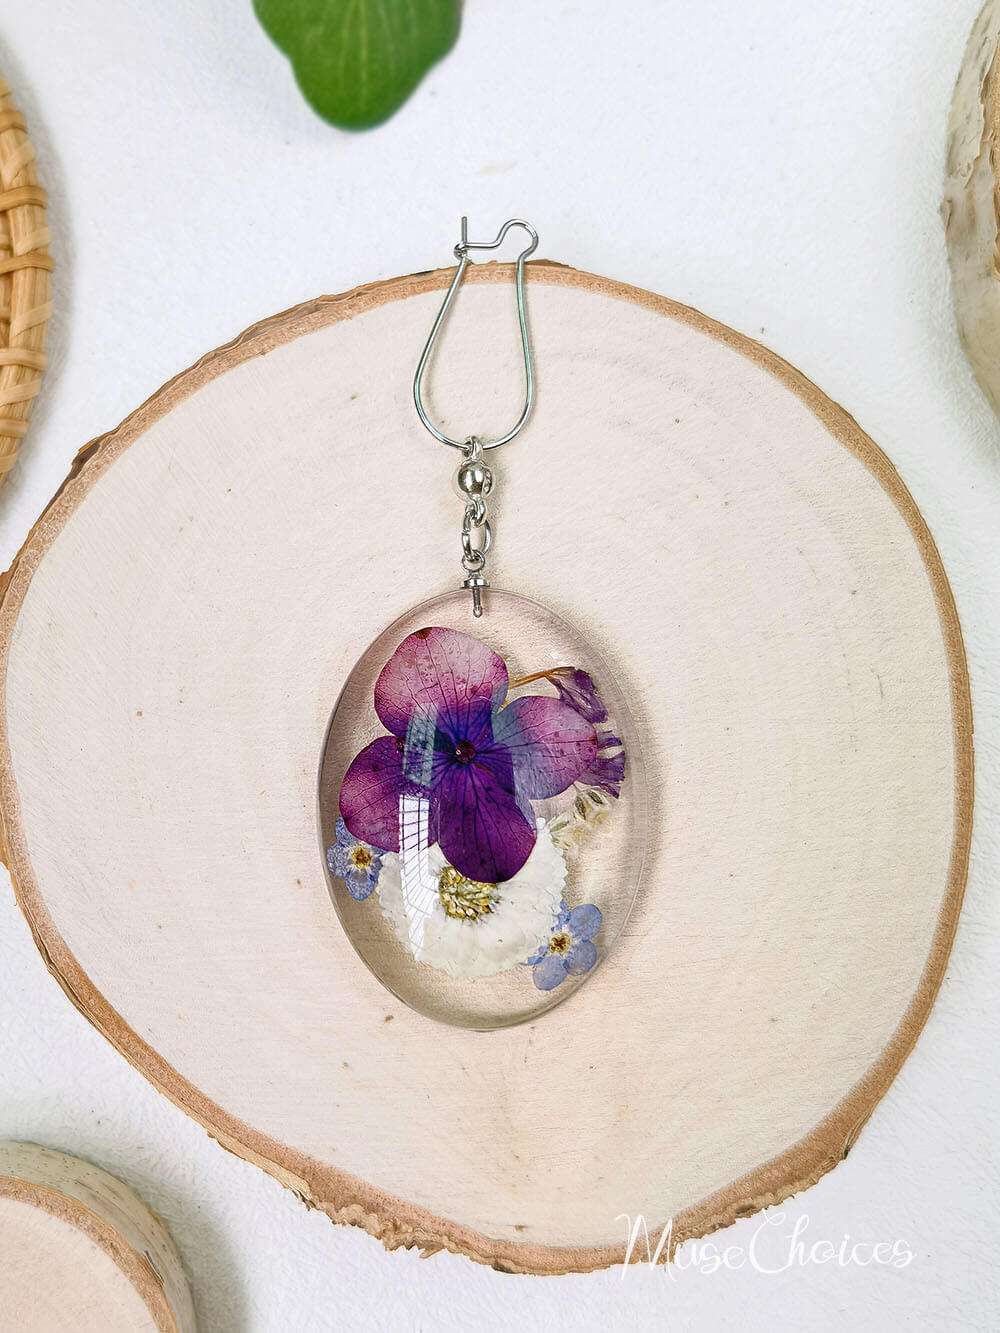 Resin Pressed Flower Earrings - Forget Me Not Pansy